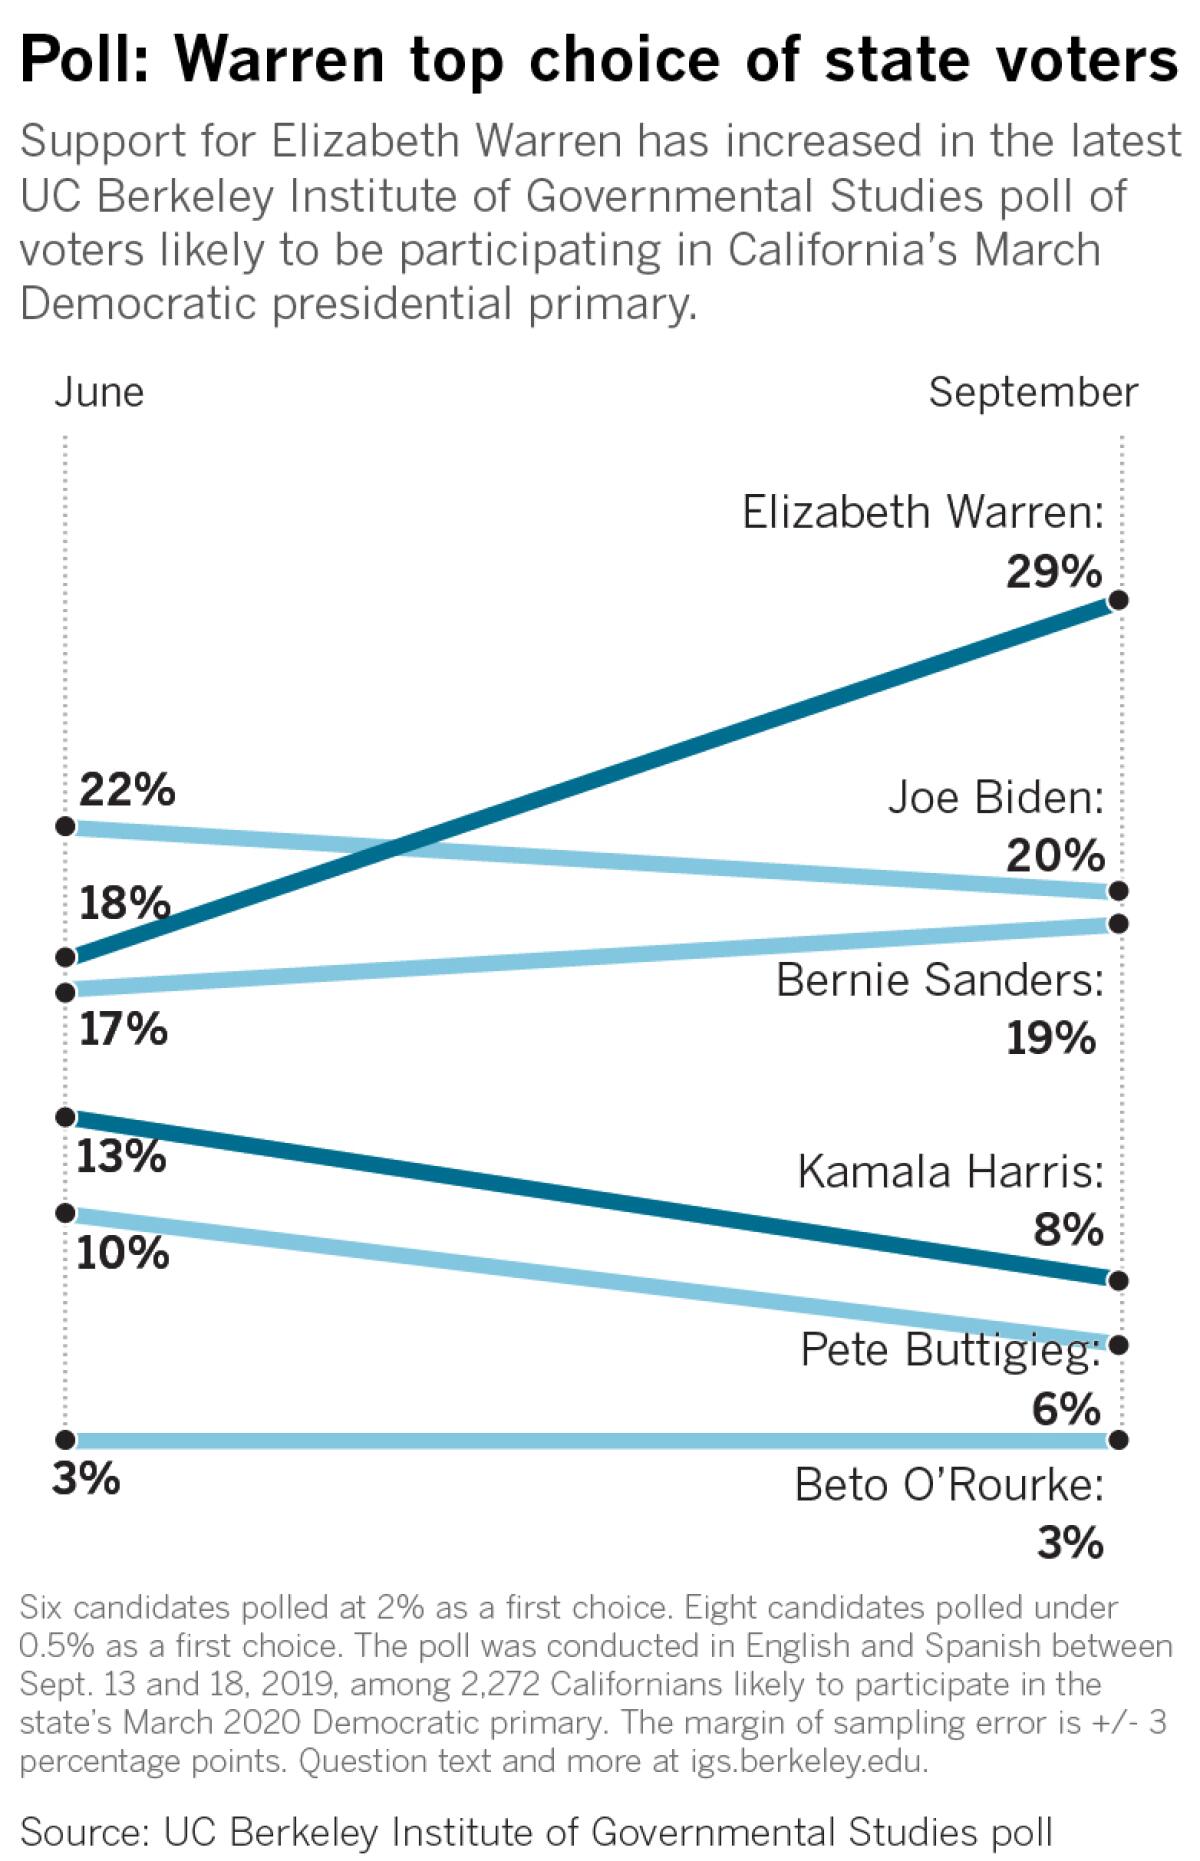 Support for Elizabeth Warren has increased in the latest UC Berkeley Institute of Governmental Studies poll of voters likely to be participating in California’s March Democratic presidential primary.